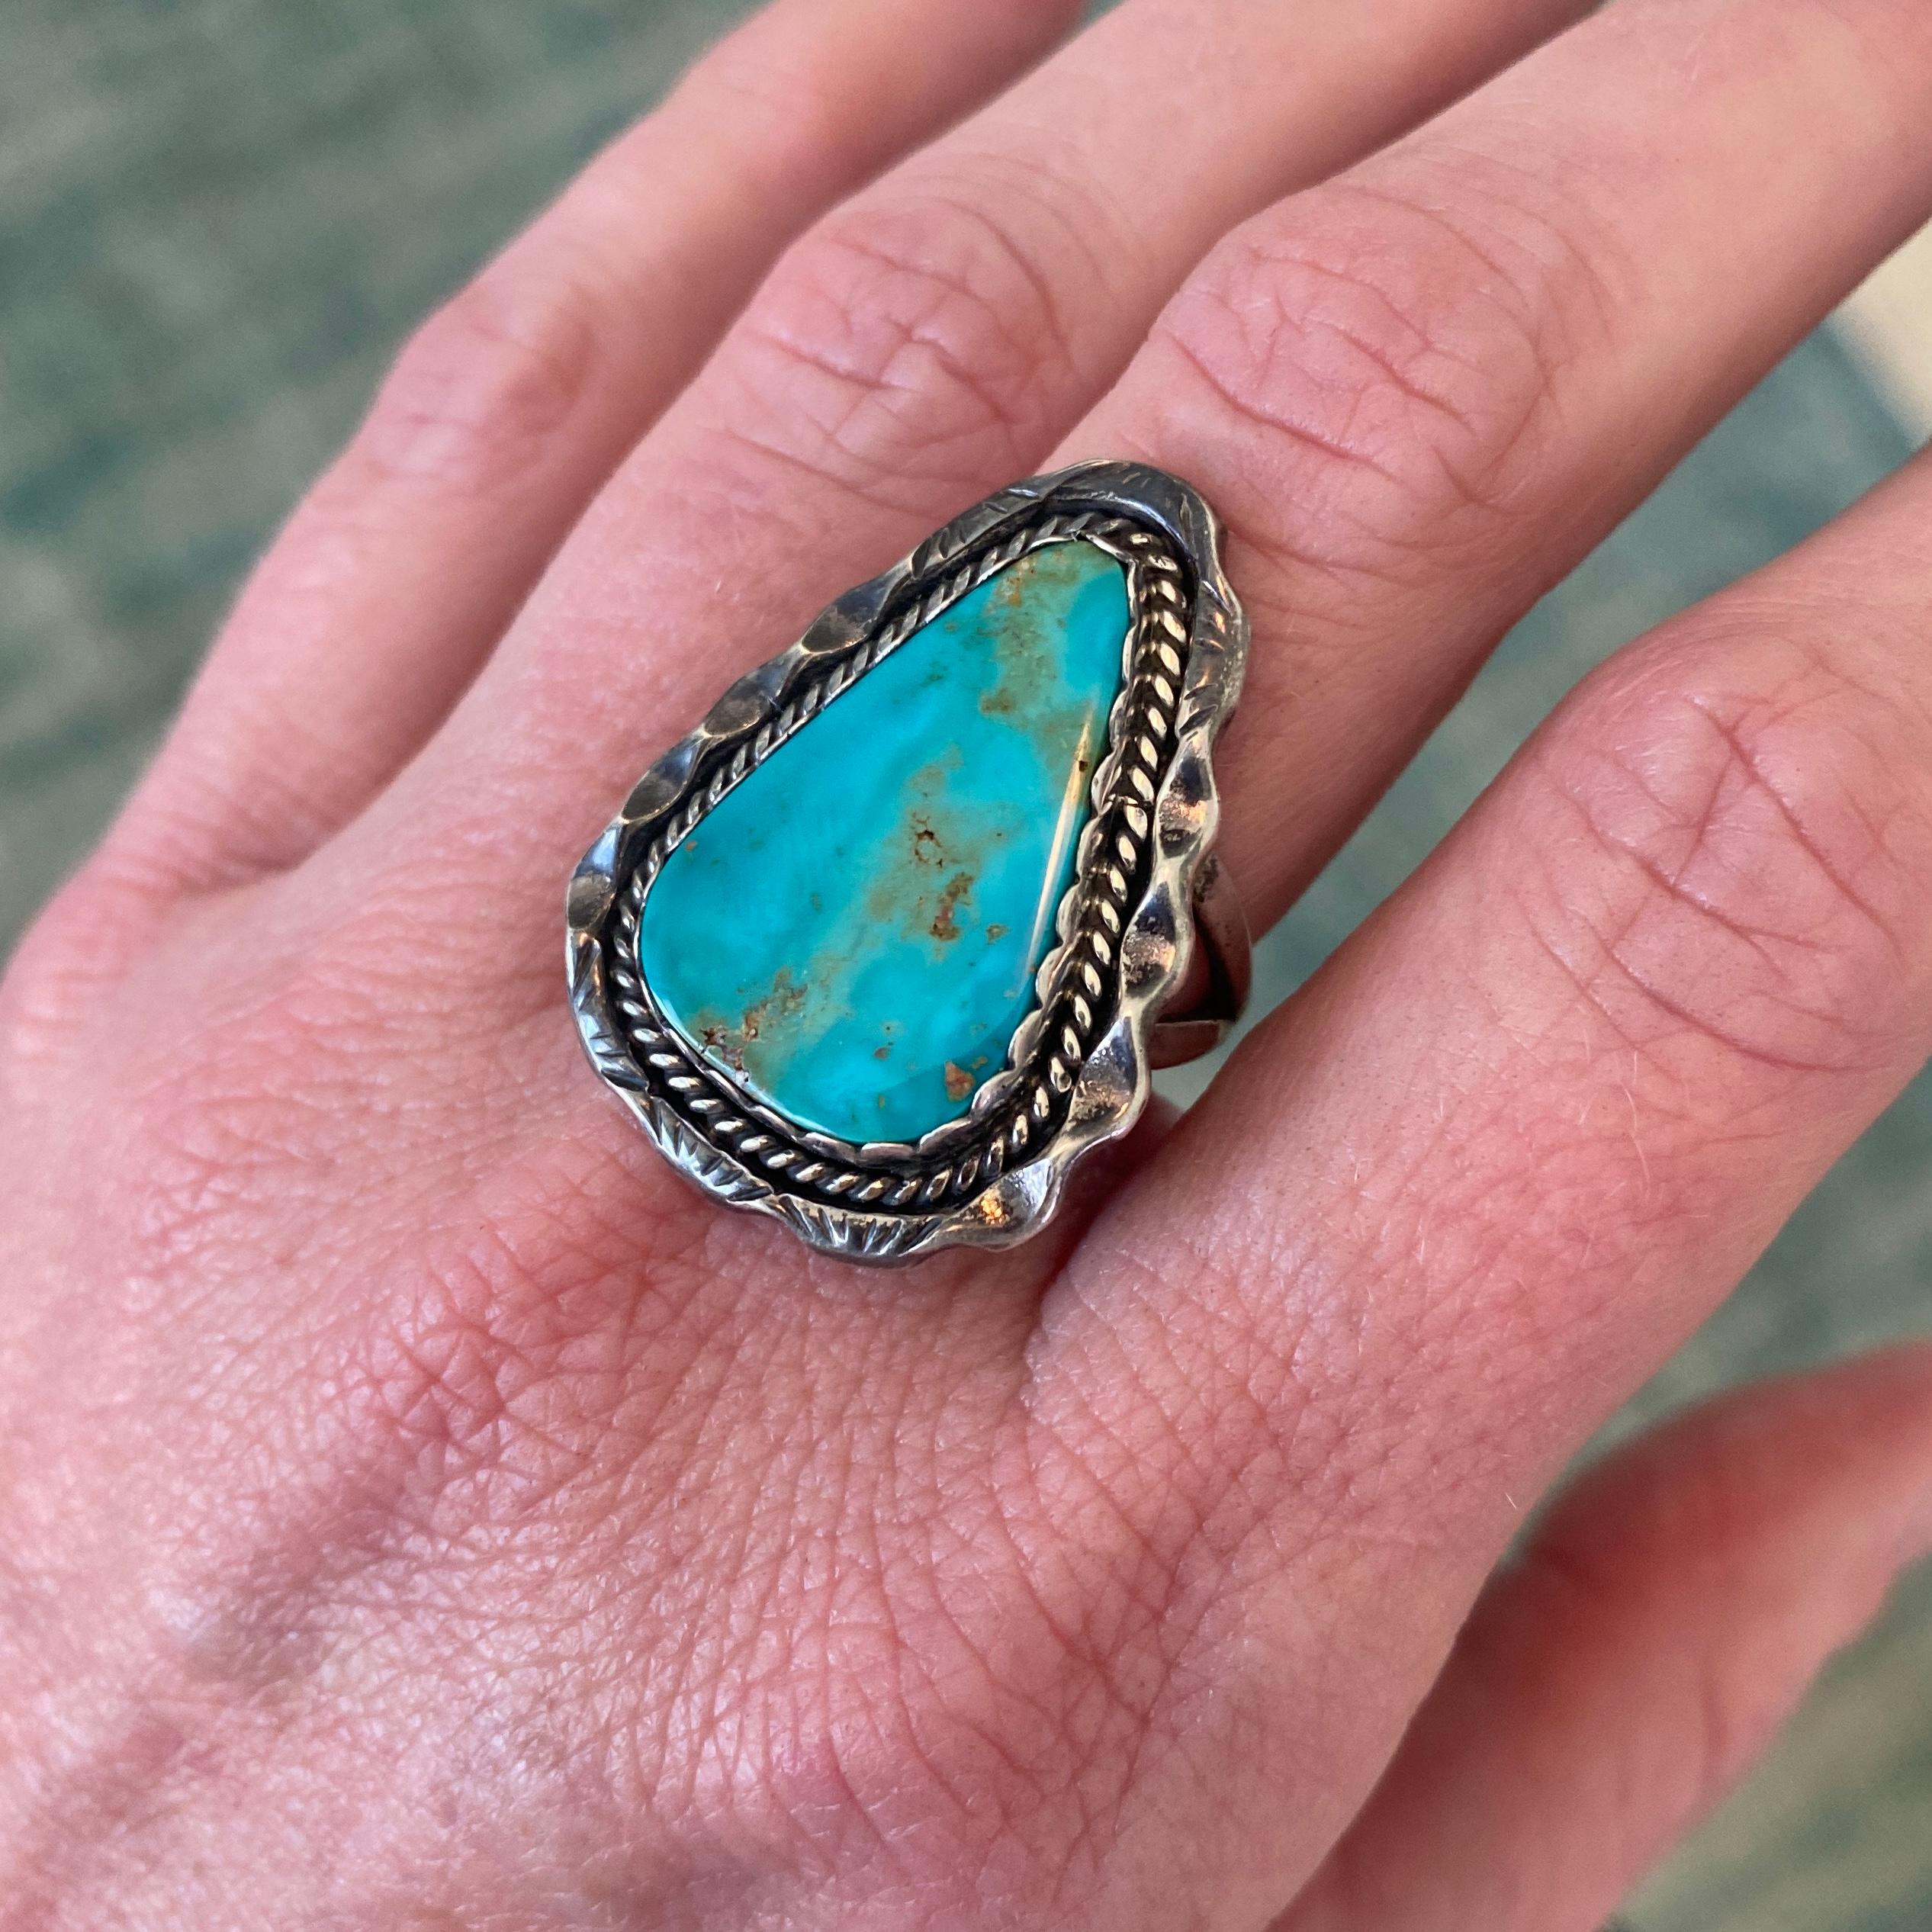 Turquoise Arrowhead Shaped Smooth Cabochon Textured Statement Sterling Ring 4